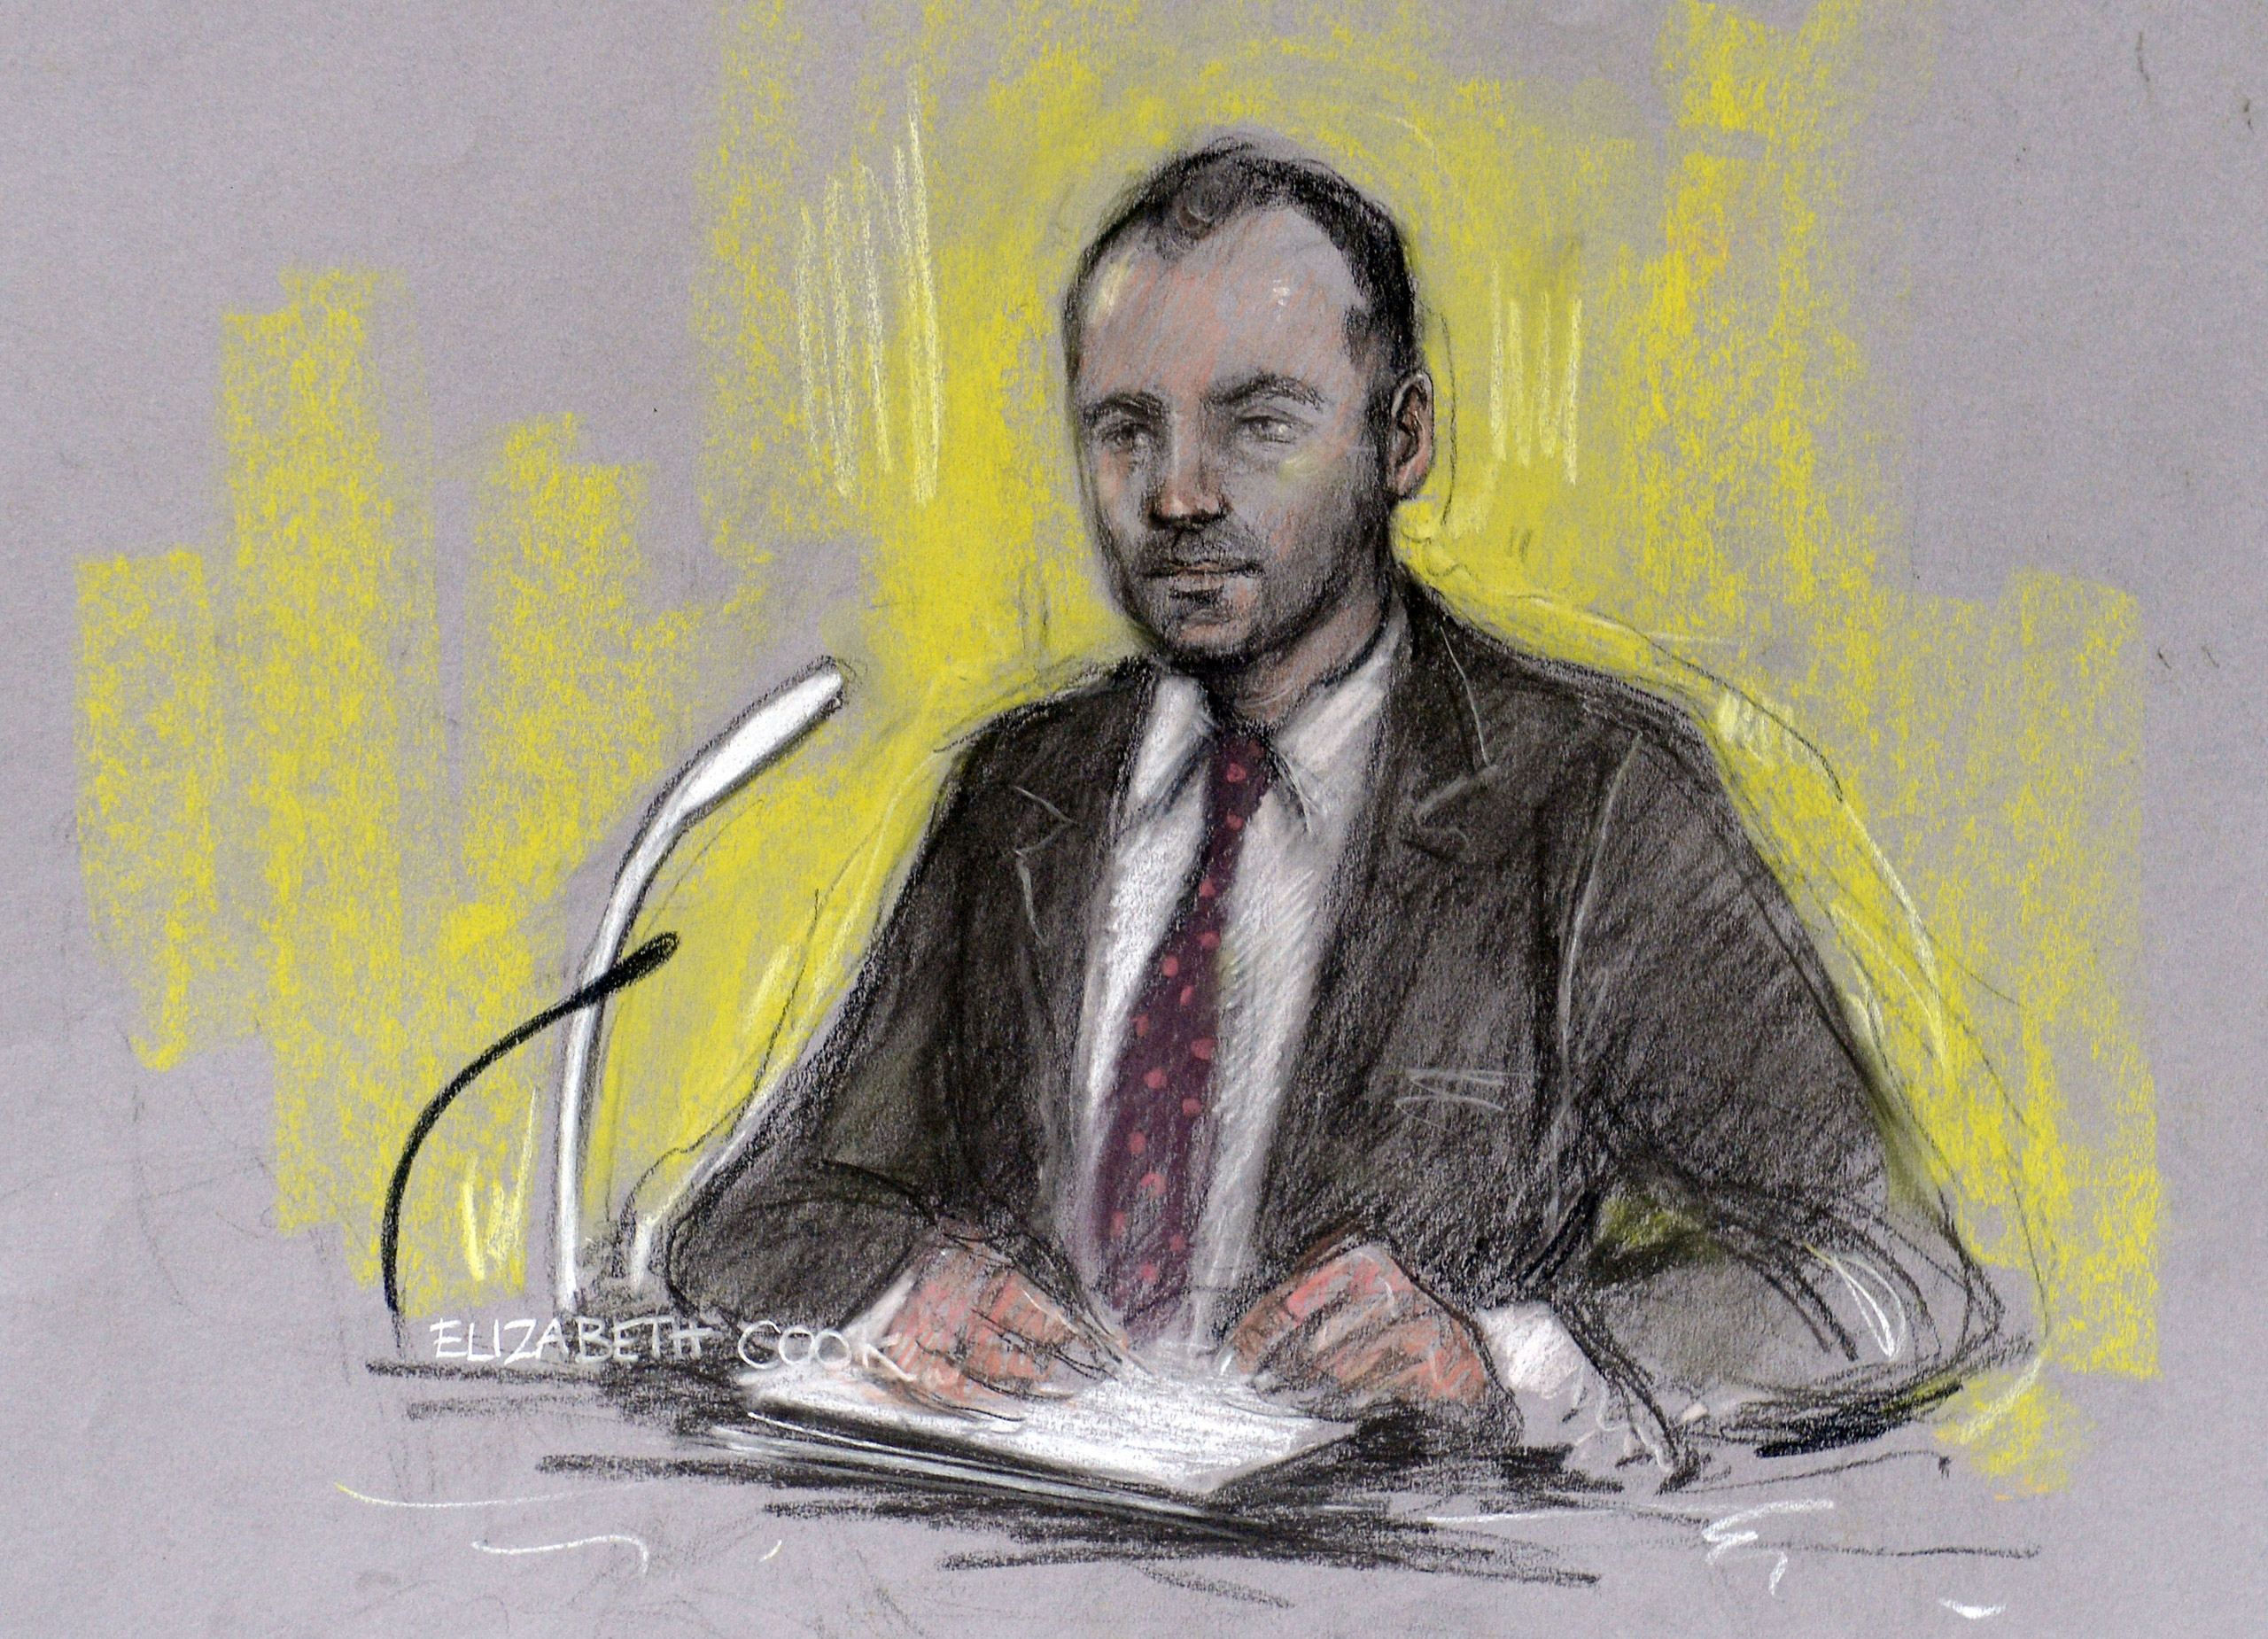 Jude Law in the witness box at the Old Bailey in London during the News of the World phone-hacking trial on Jan. 27, 2014. The scandal forced media mogul Rupert Murdoch to shutter the 168-year-old publication in 2011. Law was awarded £130,000 in claims.